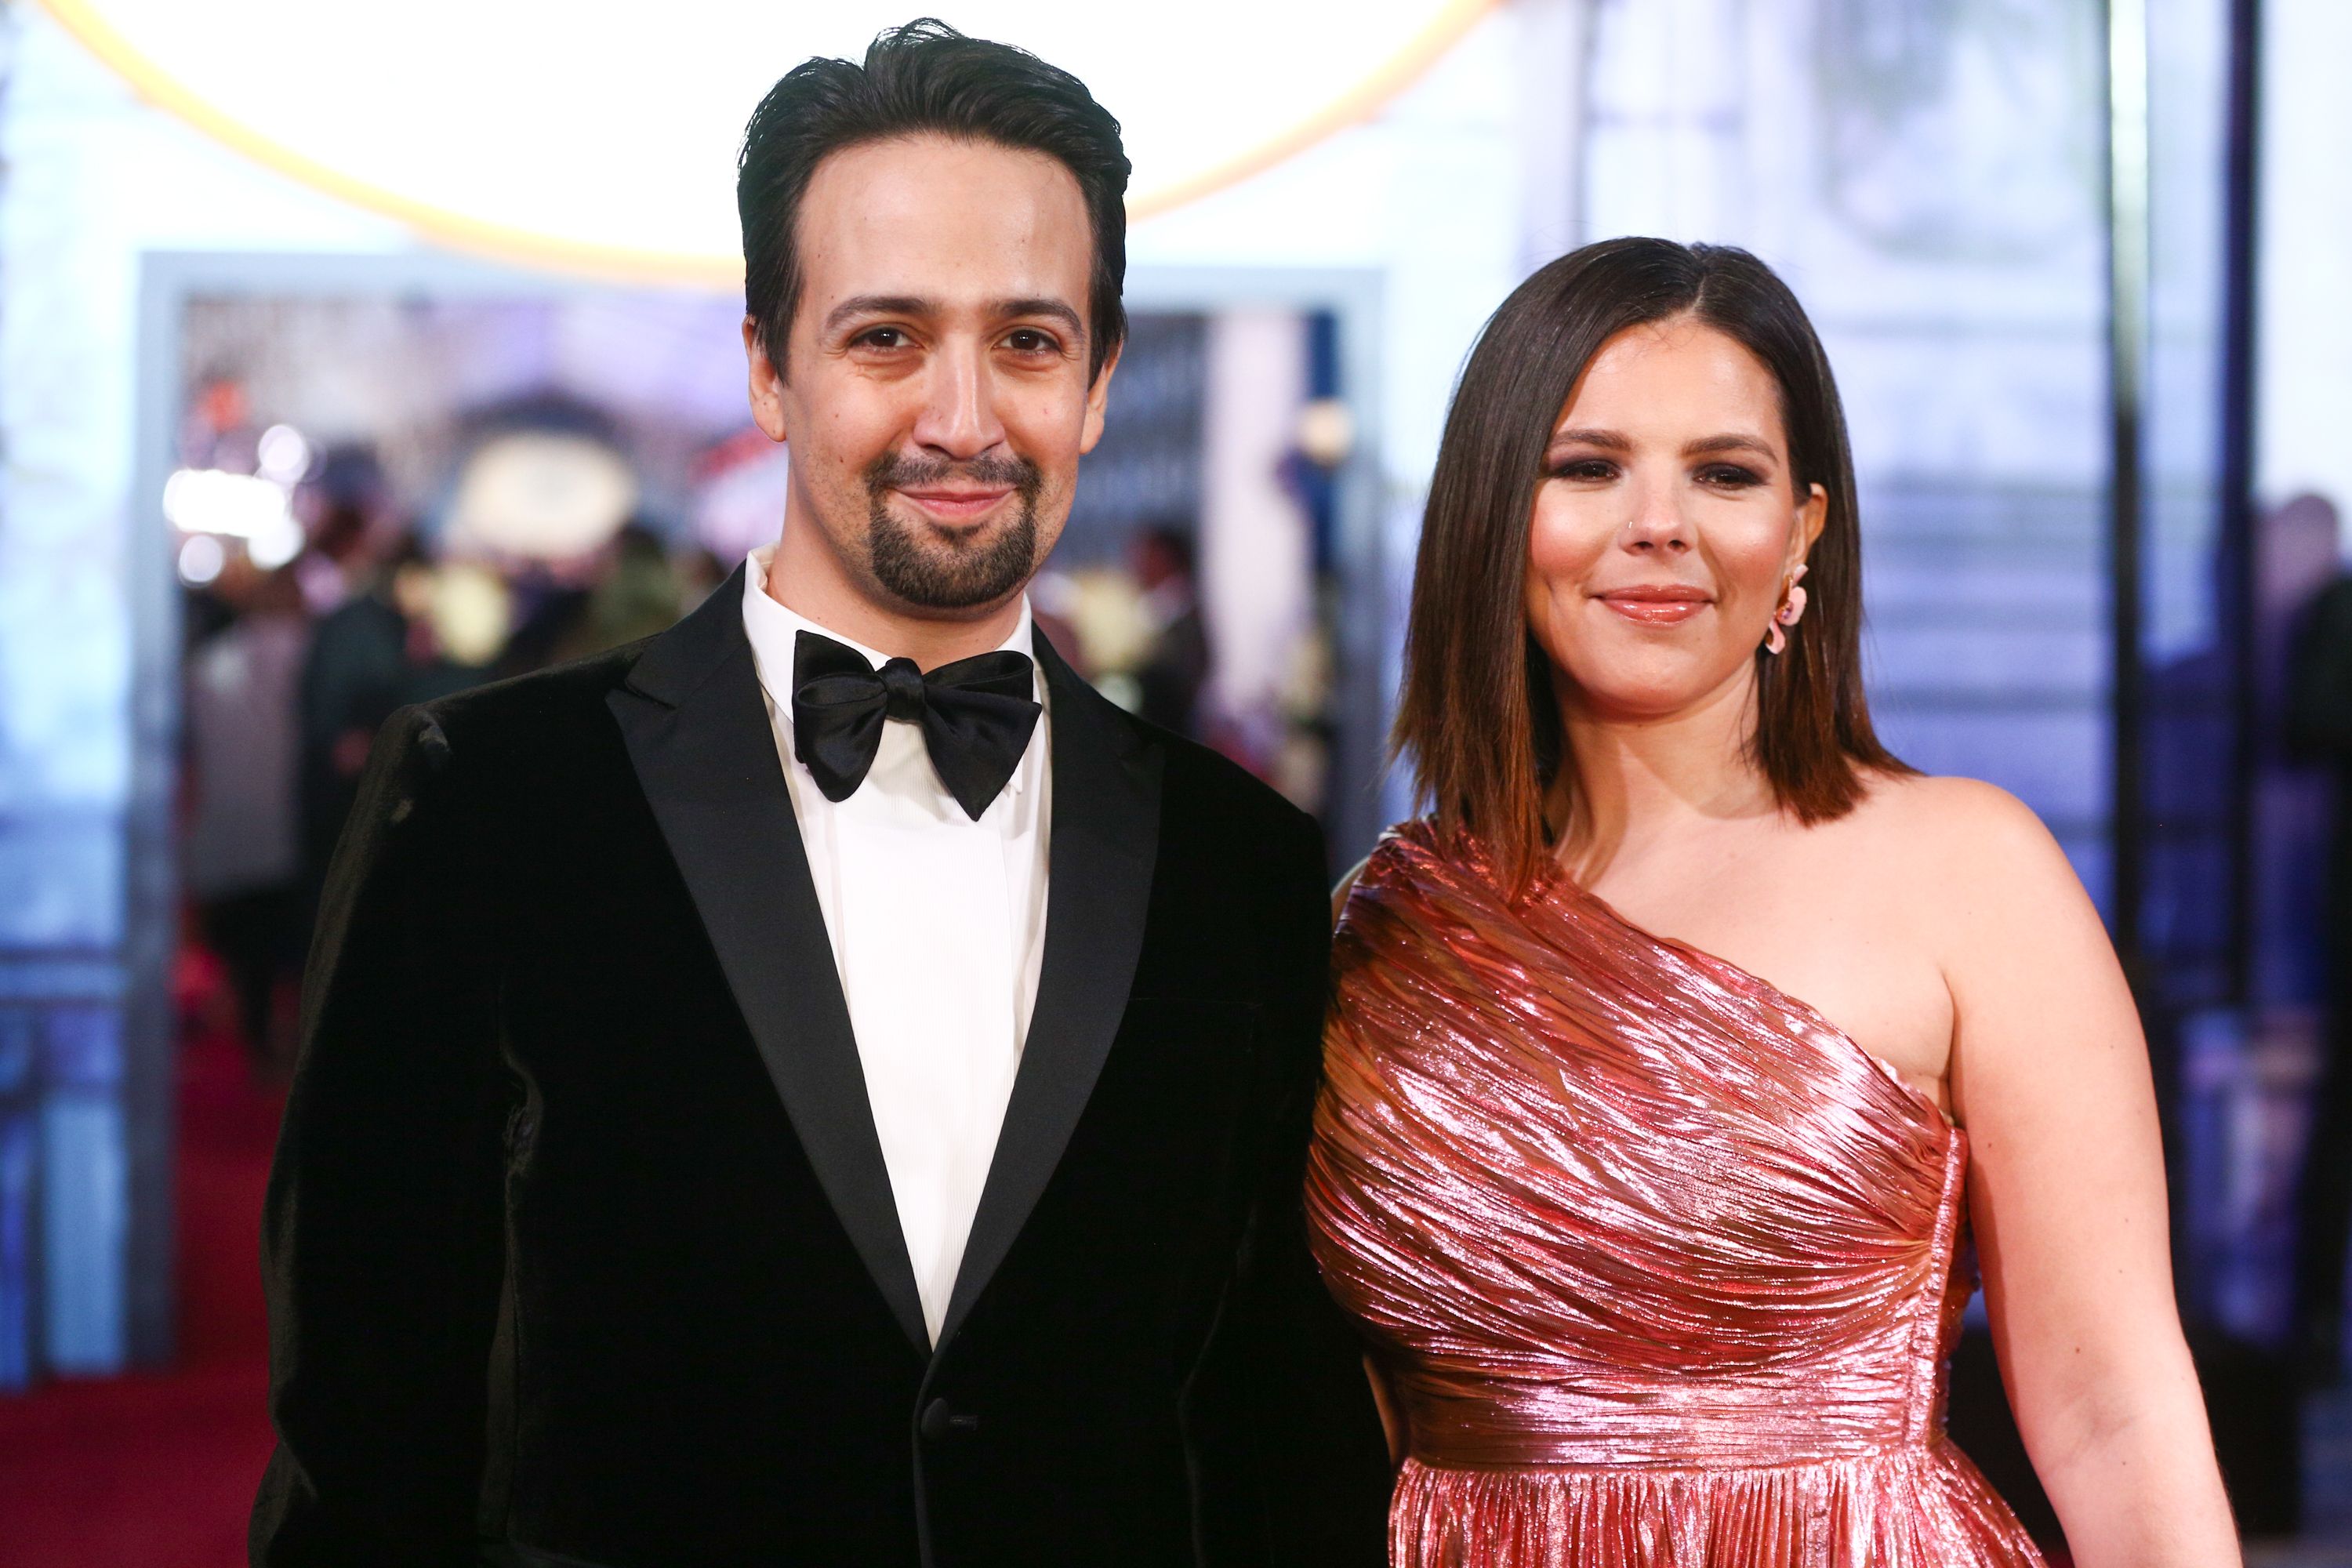 Facts About Lin-Manuel Miranda's Wife Vanessa Nadal